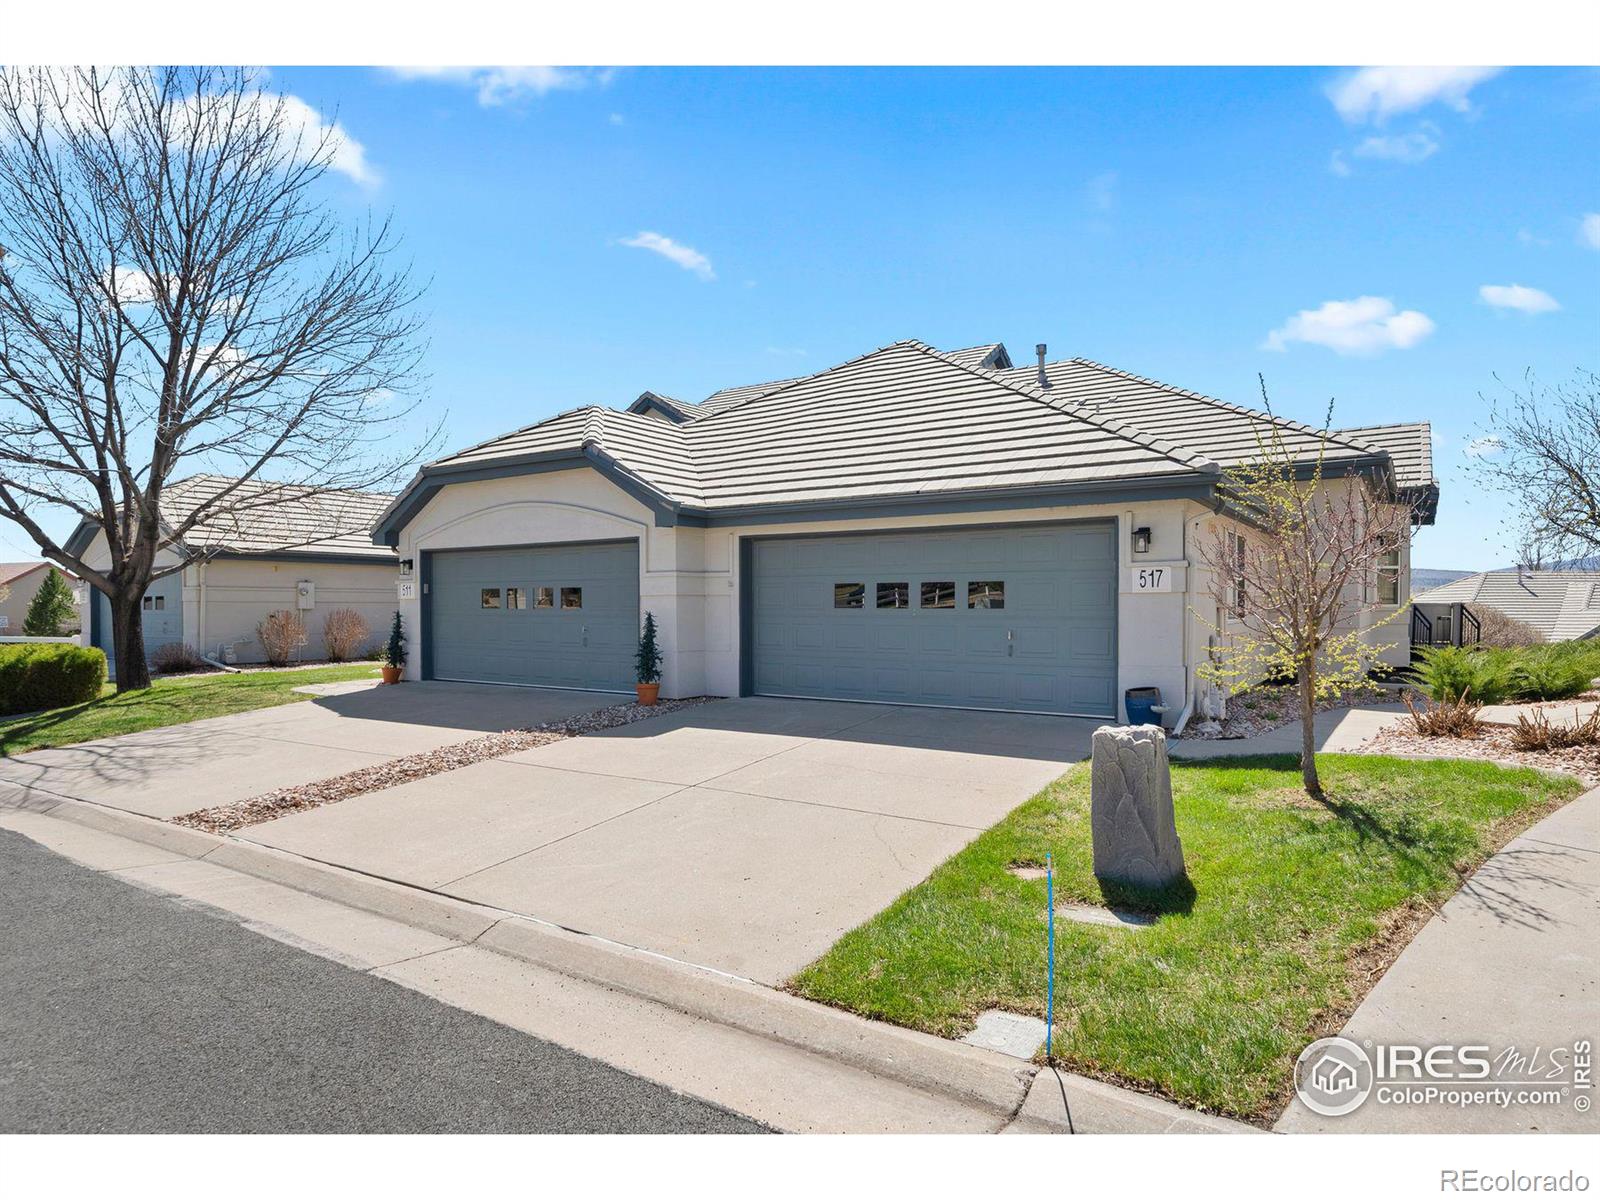 517  Clubhouse Drive, loveland MLS: 4567891006925 Beds: 2 Baths: 3 Price: $565,000